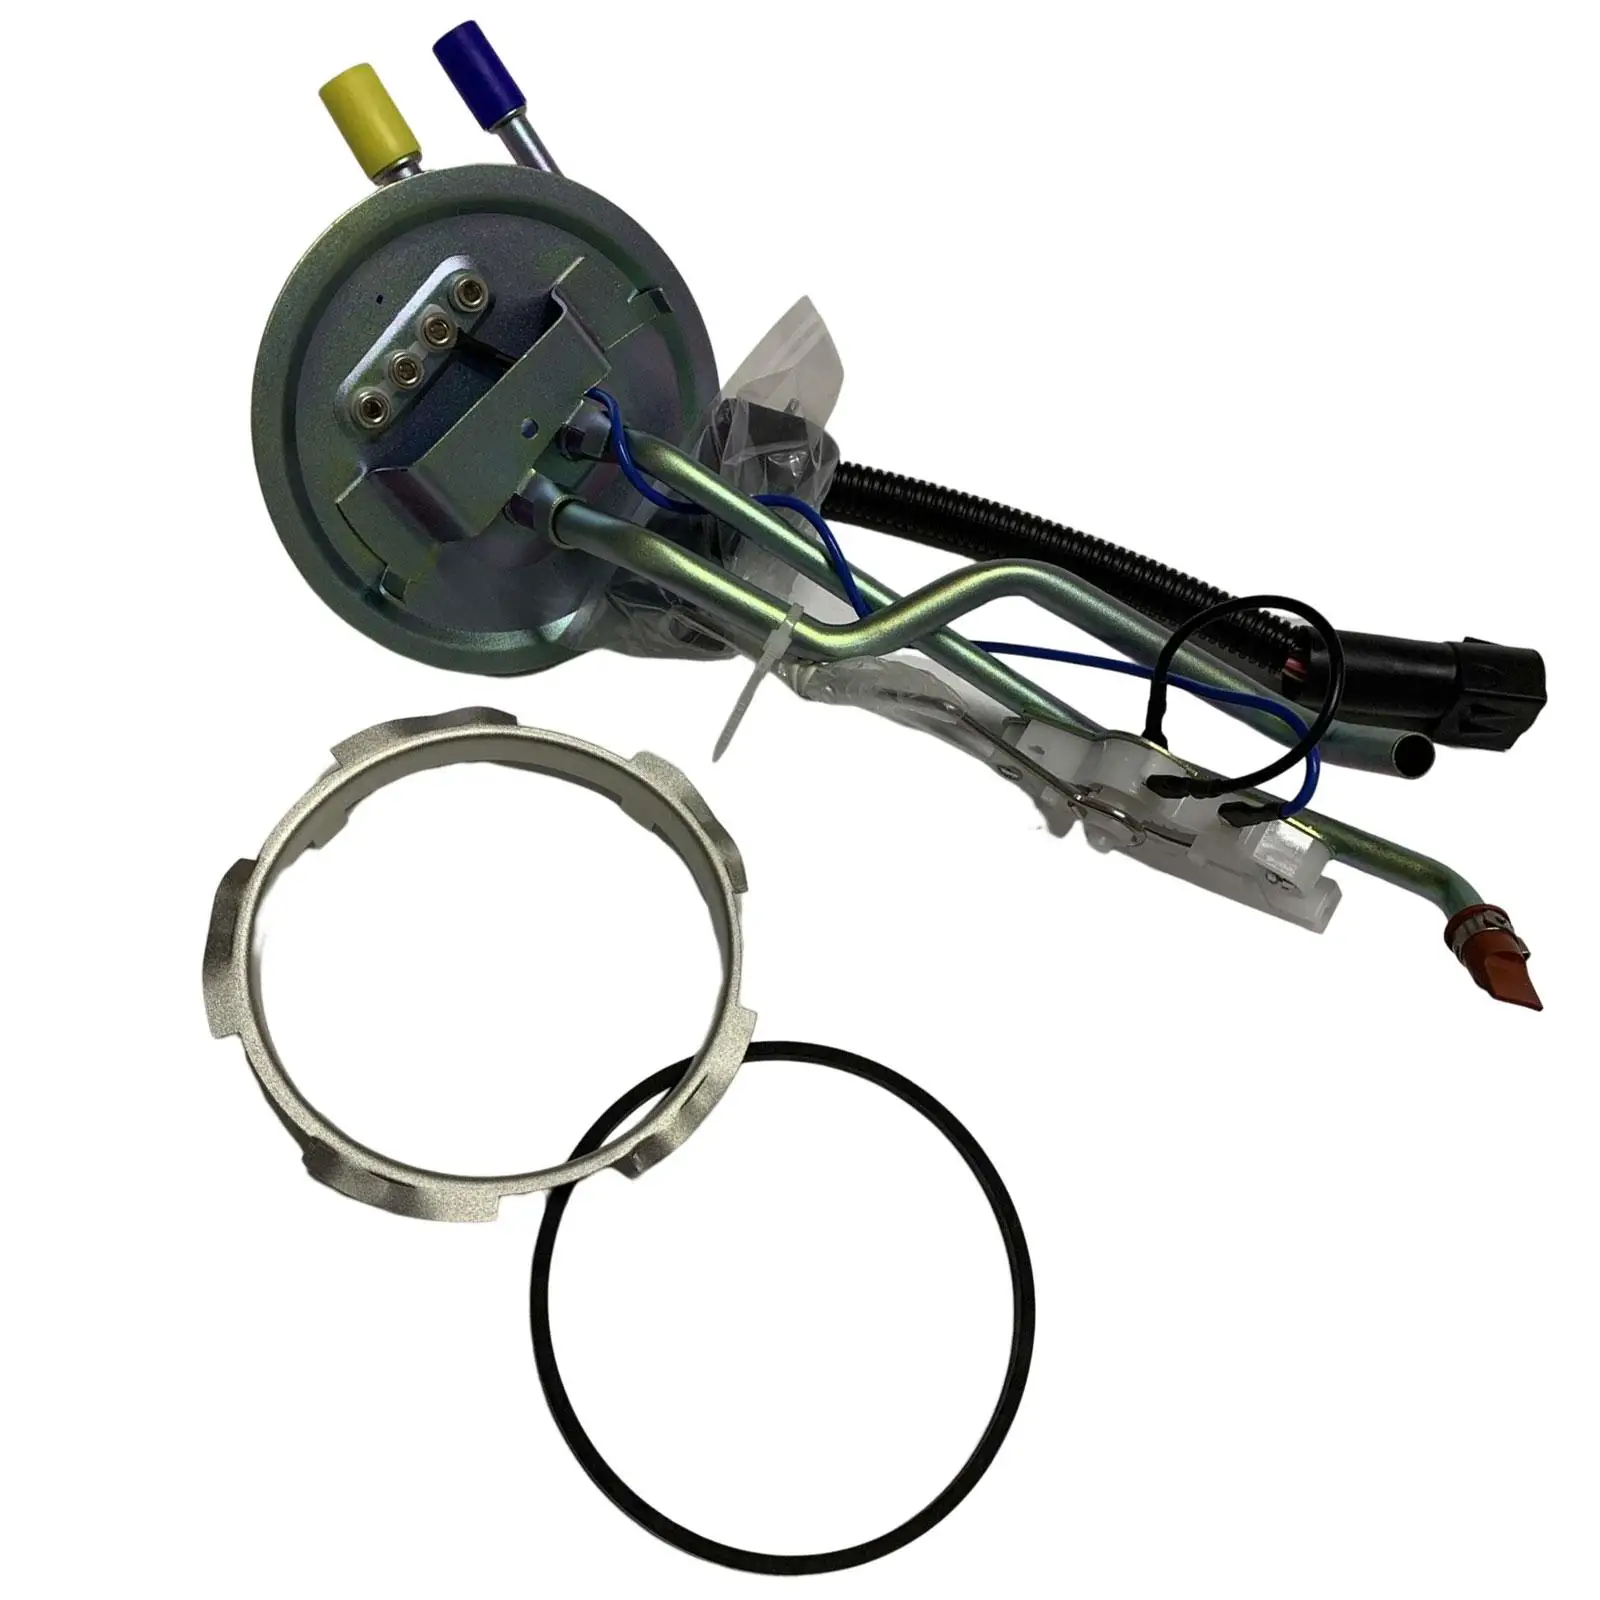 Fmsu-9Der Fuel Tank Sending Unit Replaces Parts for Ford F250 F350 1994-1997 High performance Easy Installation